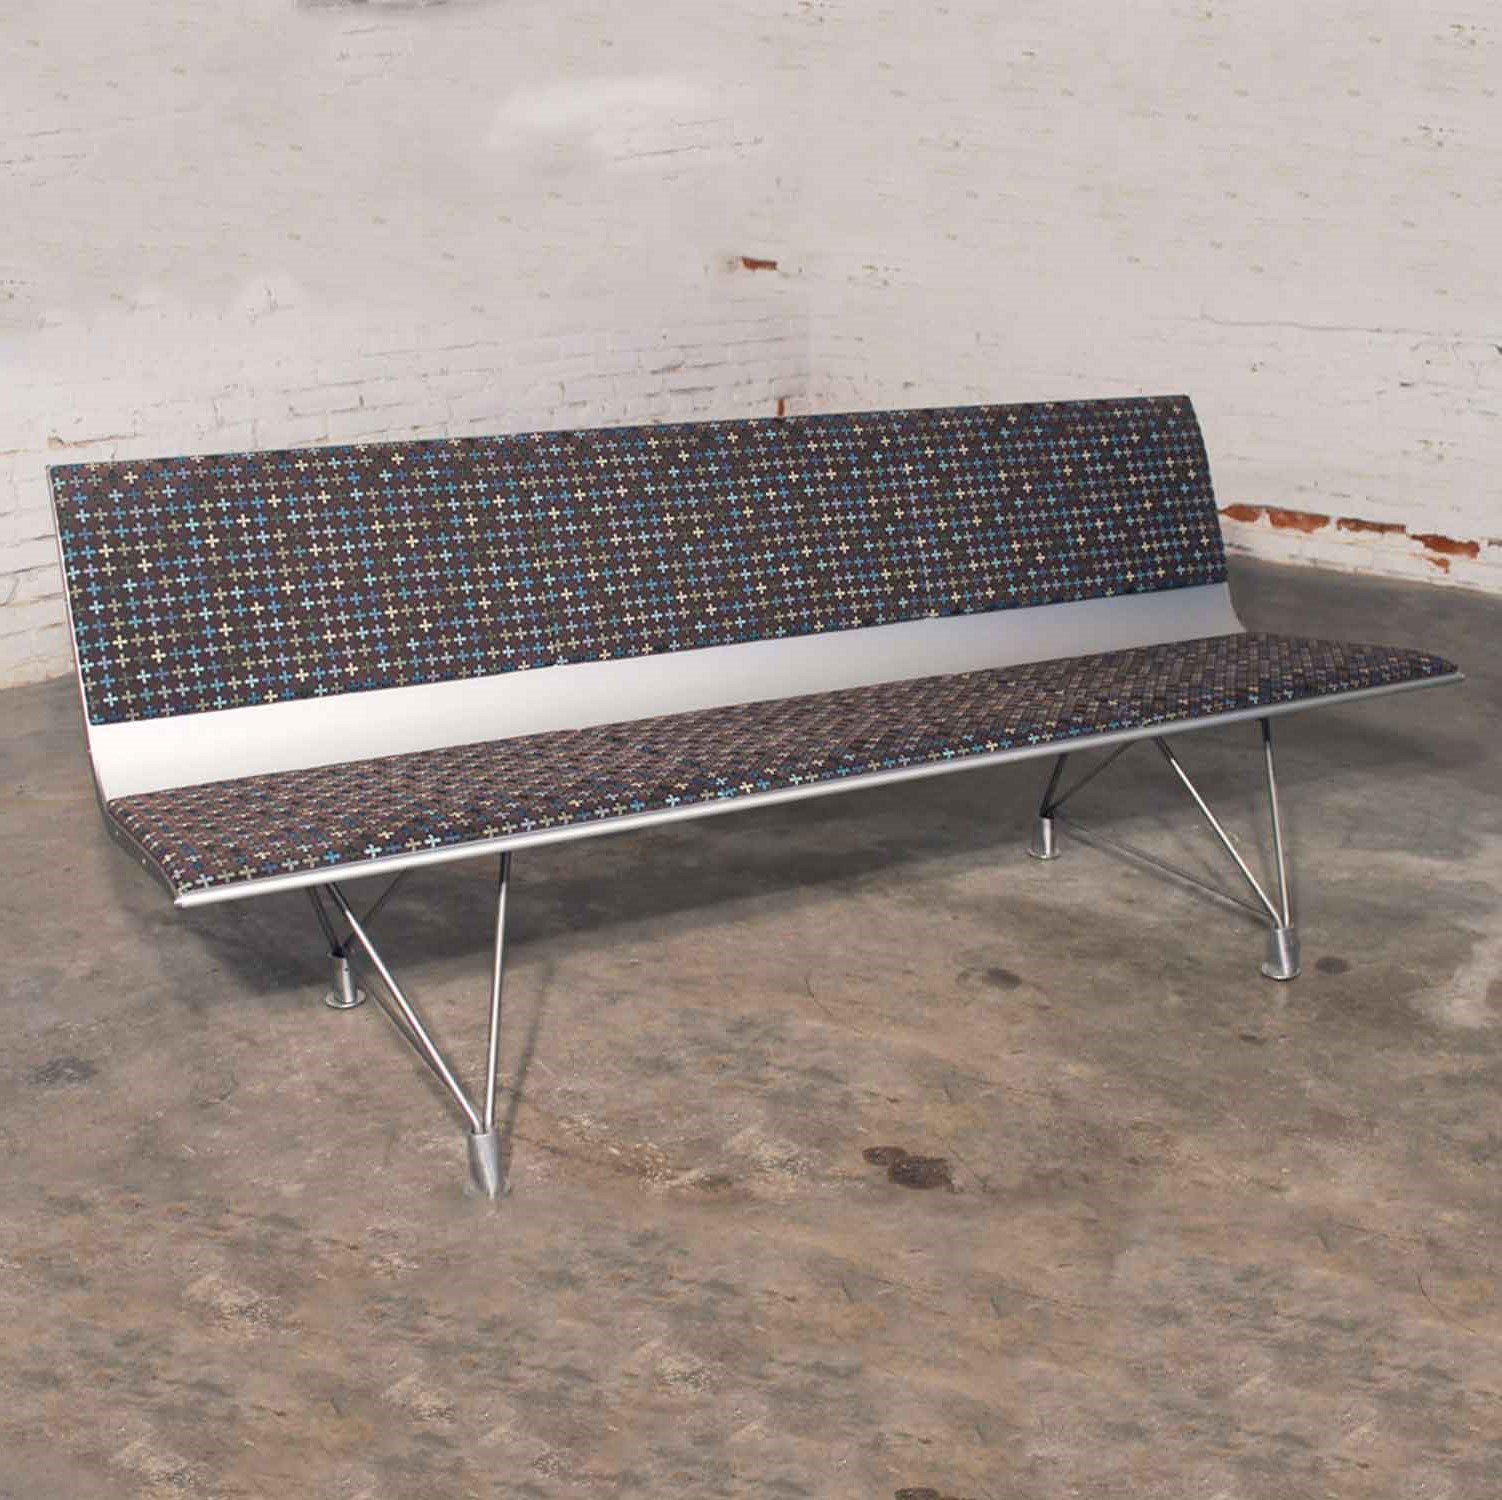 Aero Aluminum Bench from Davis Furniture by Lievore Altherr Molina